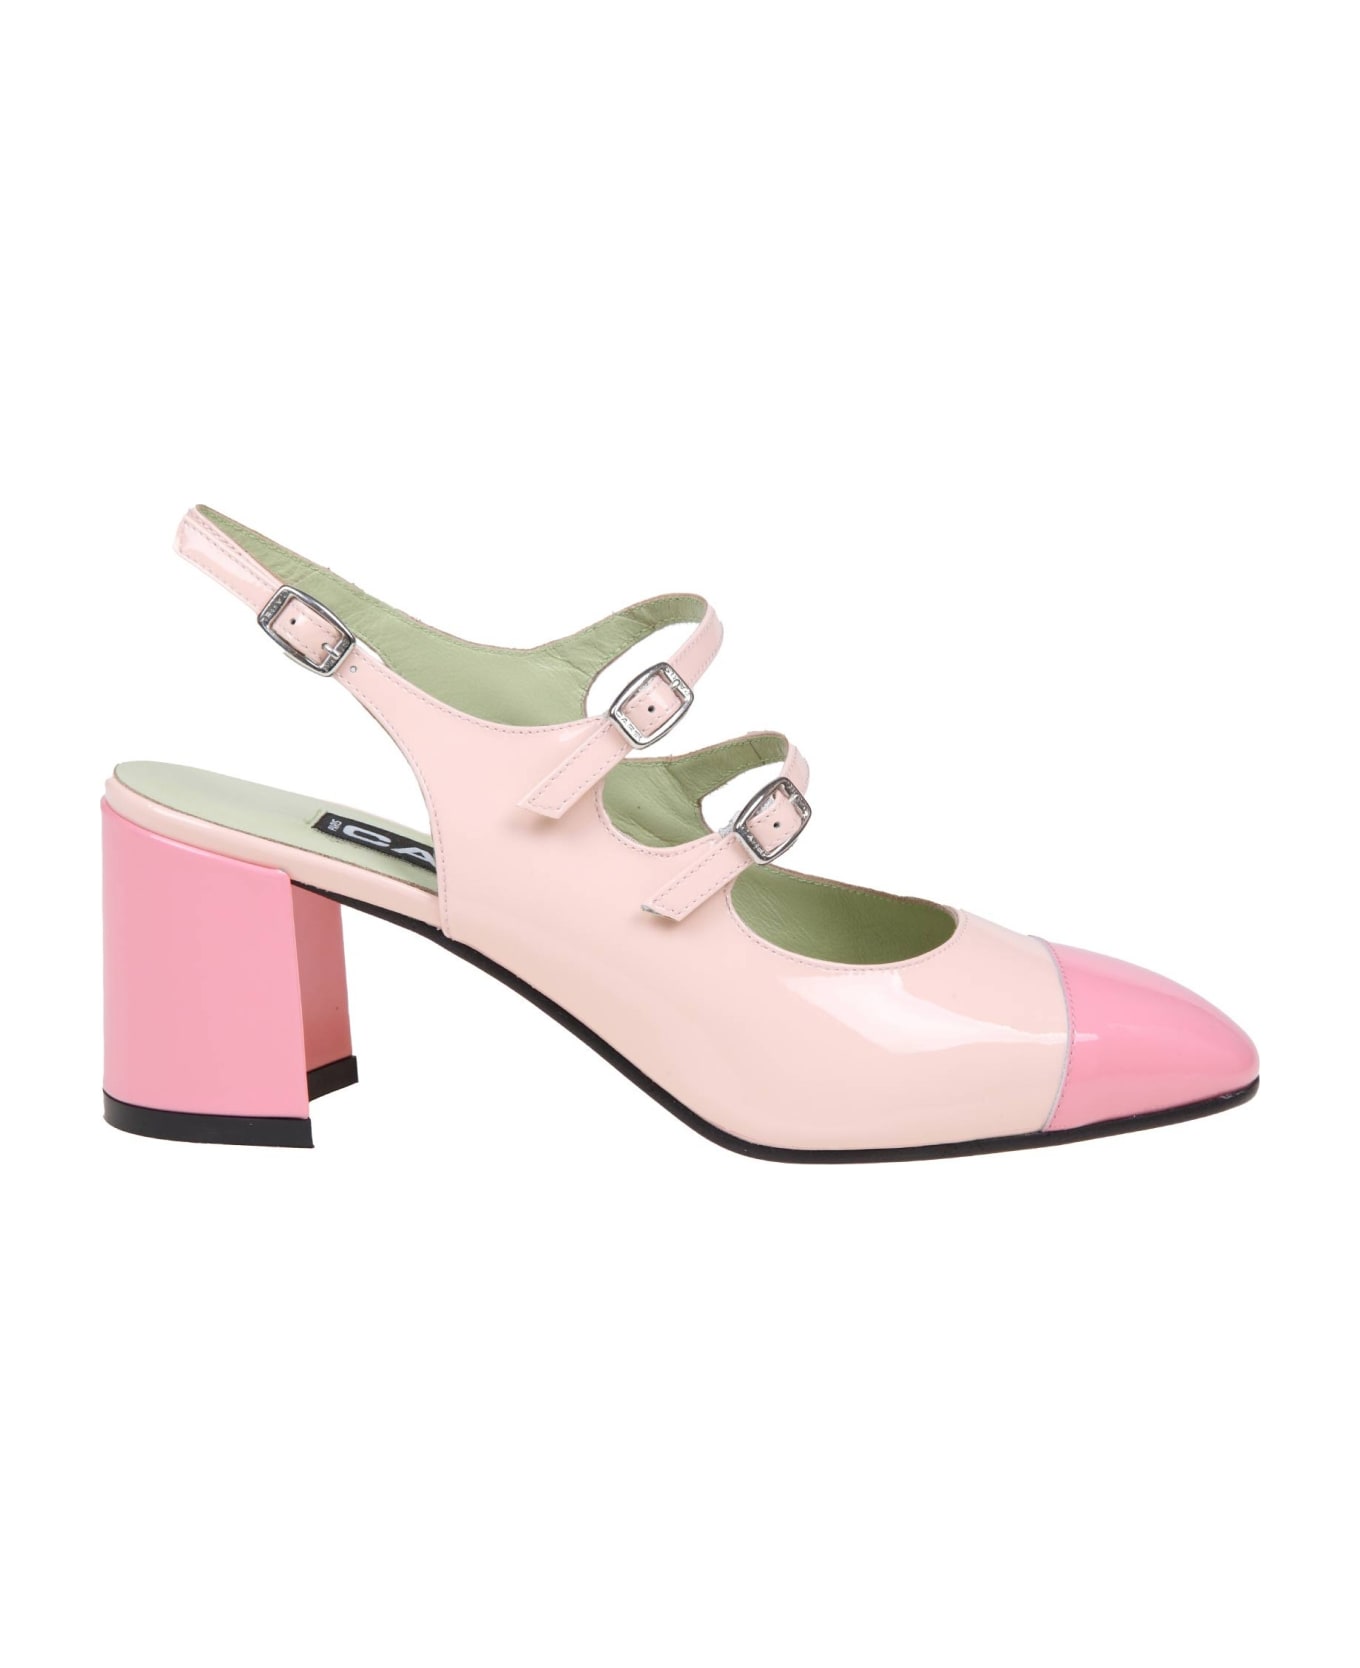 Carel Slingback Papaya In Pink Paint Leather - Pink